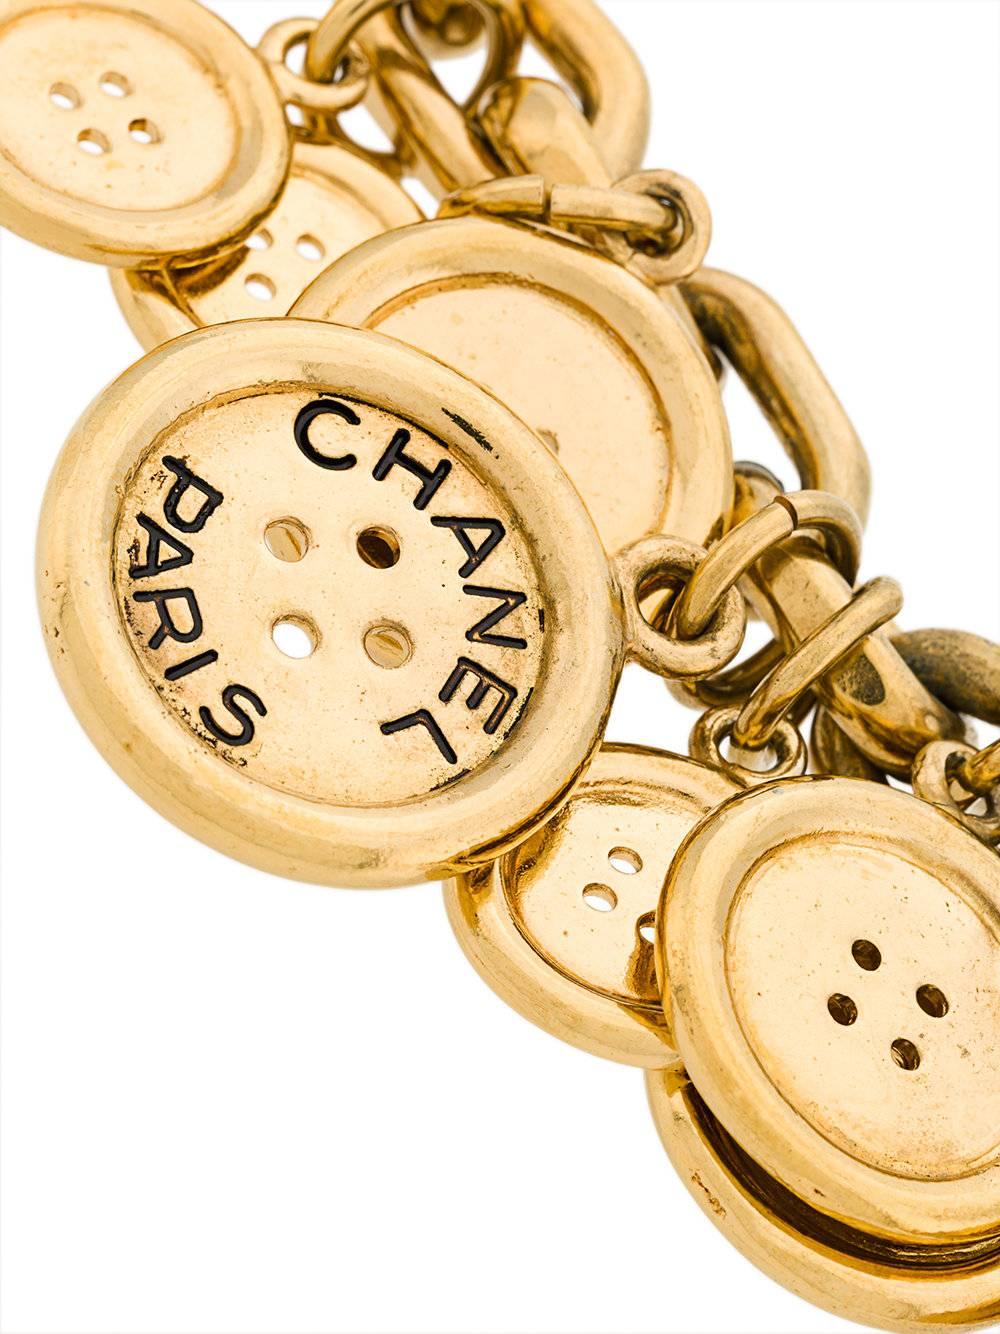 Gold-toned button charm bracelet featuring a T-bar fastening and a chunky chain.

Colour: Pale Gold

Material: gold- plated metal

Measurements: One Size

Condition: Excellent
